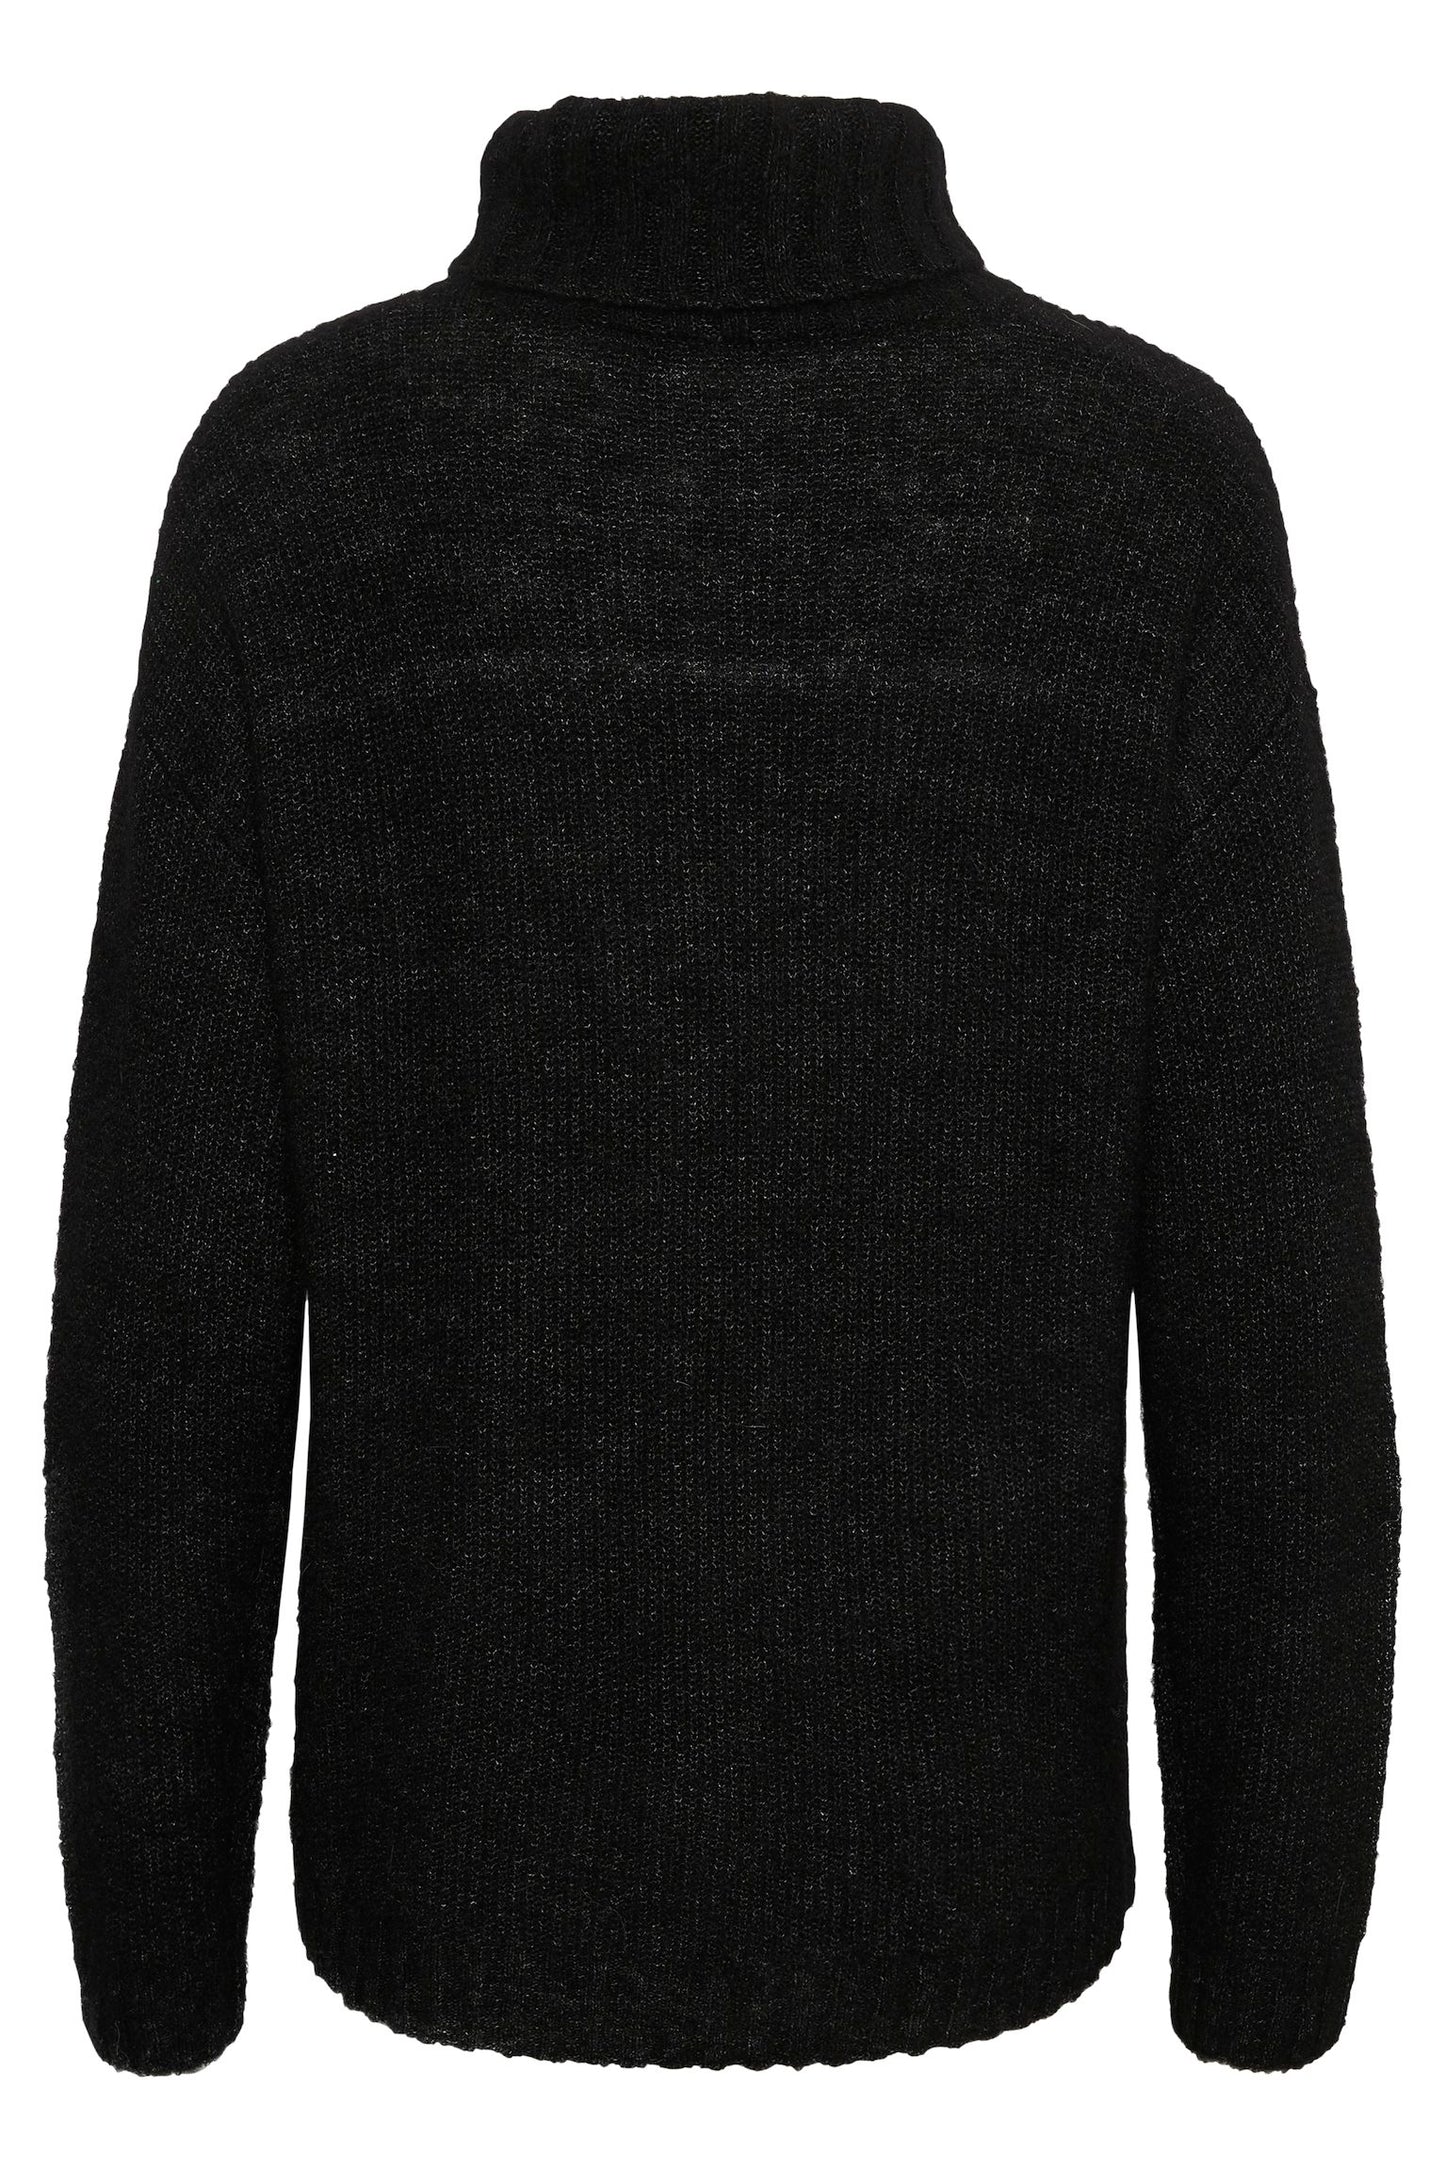 The Knit Rollneck - MEW